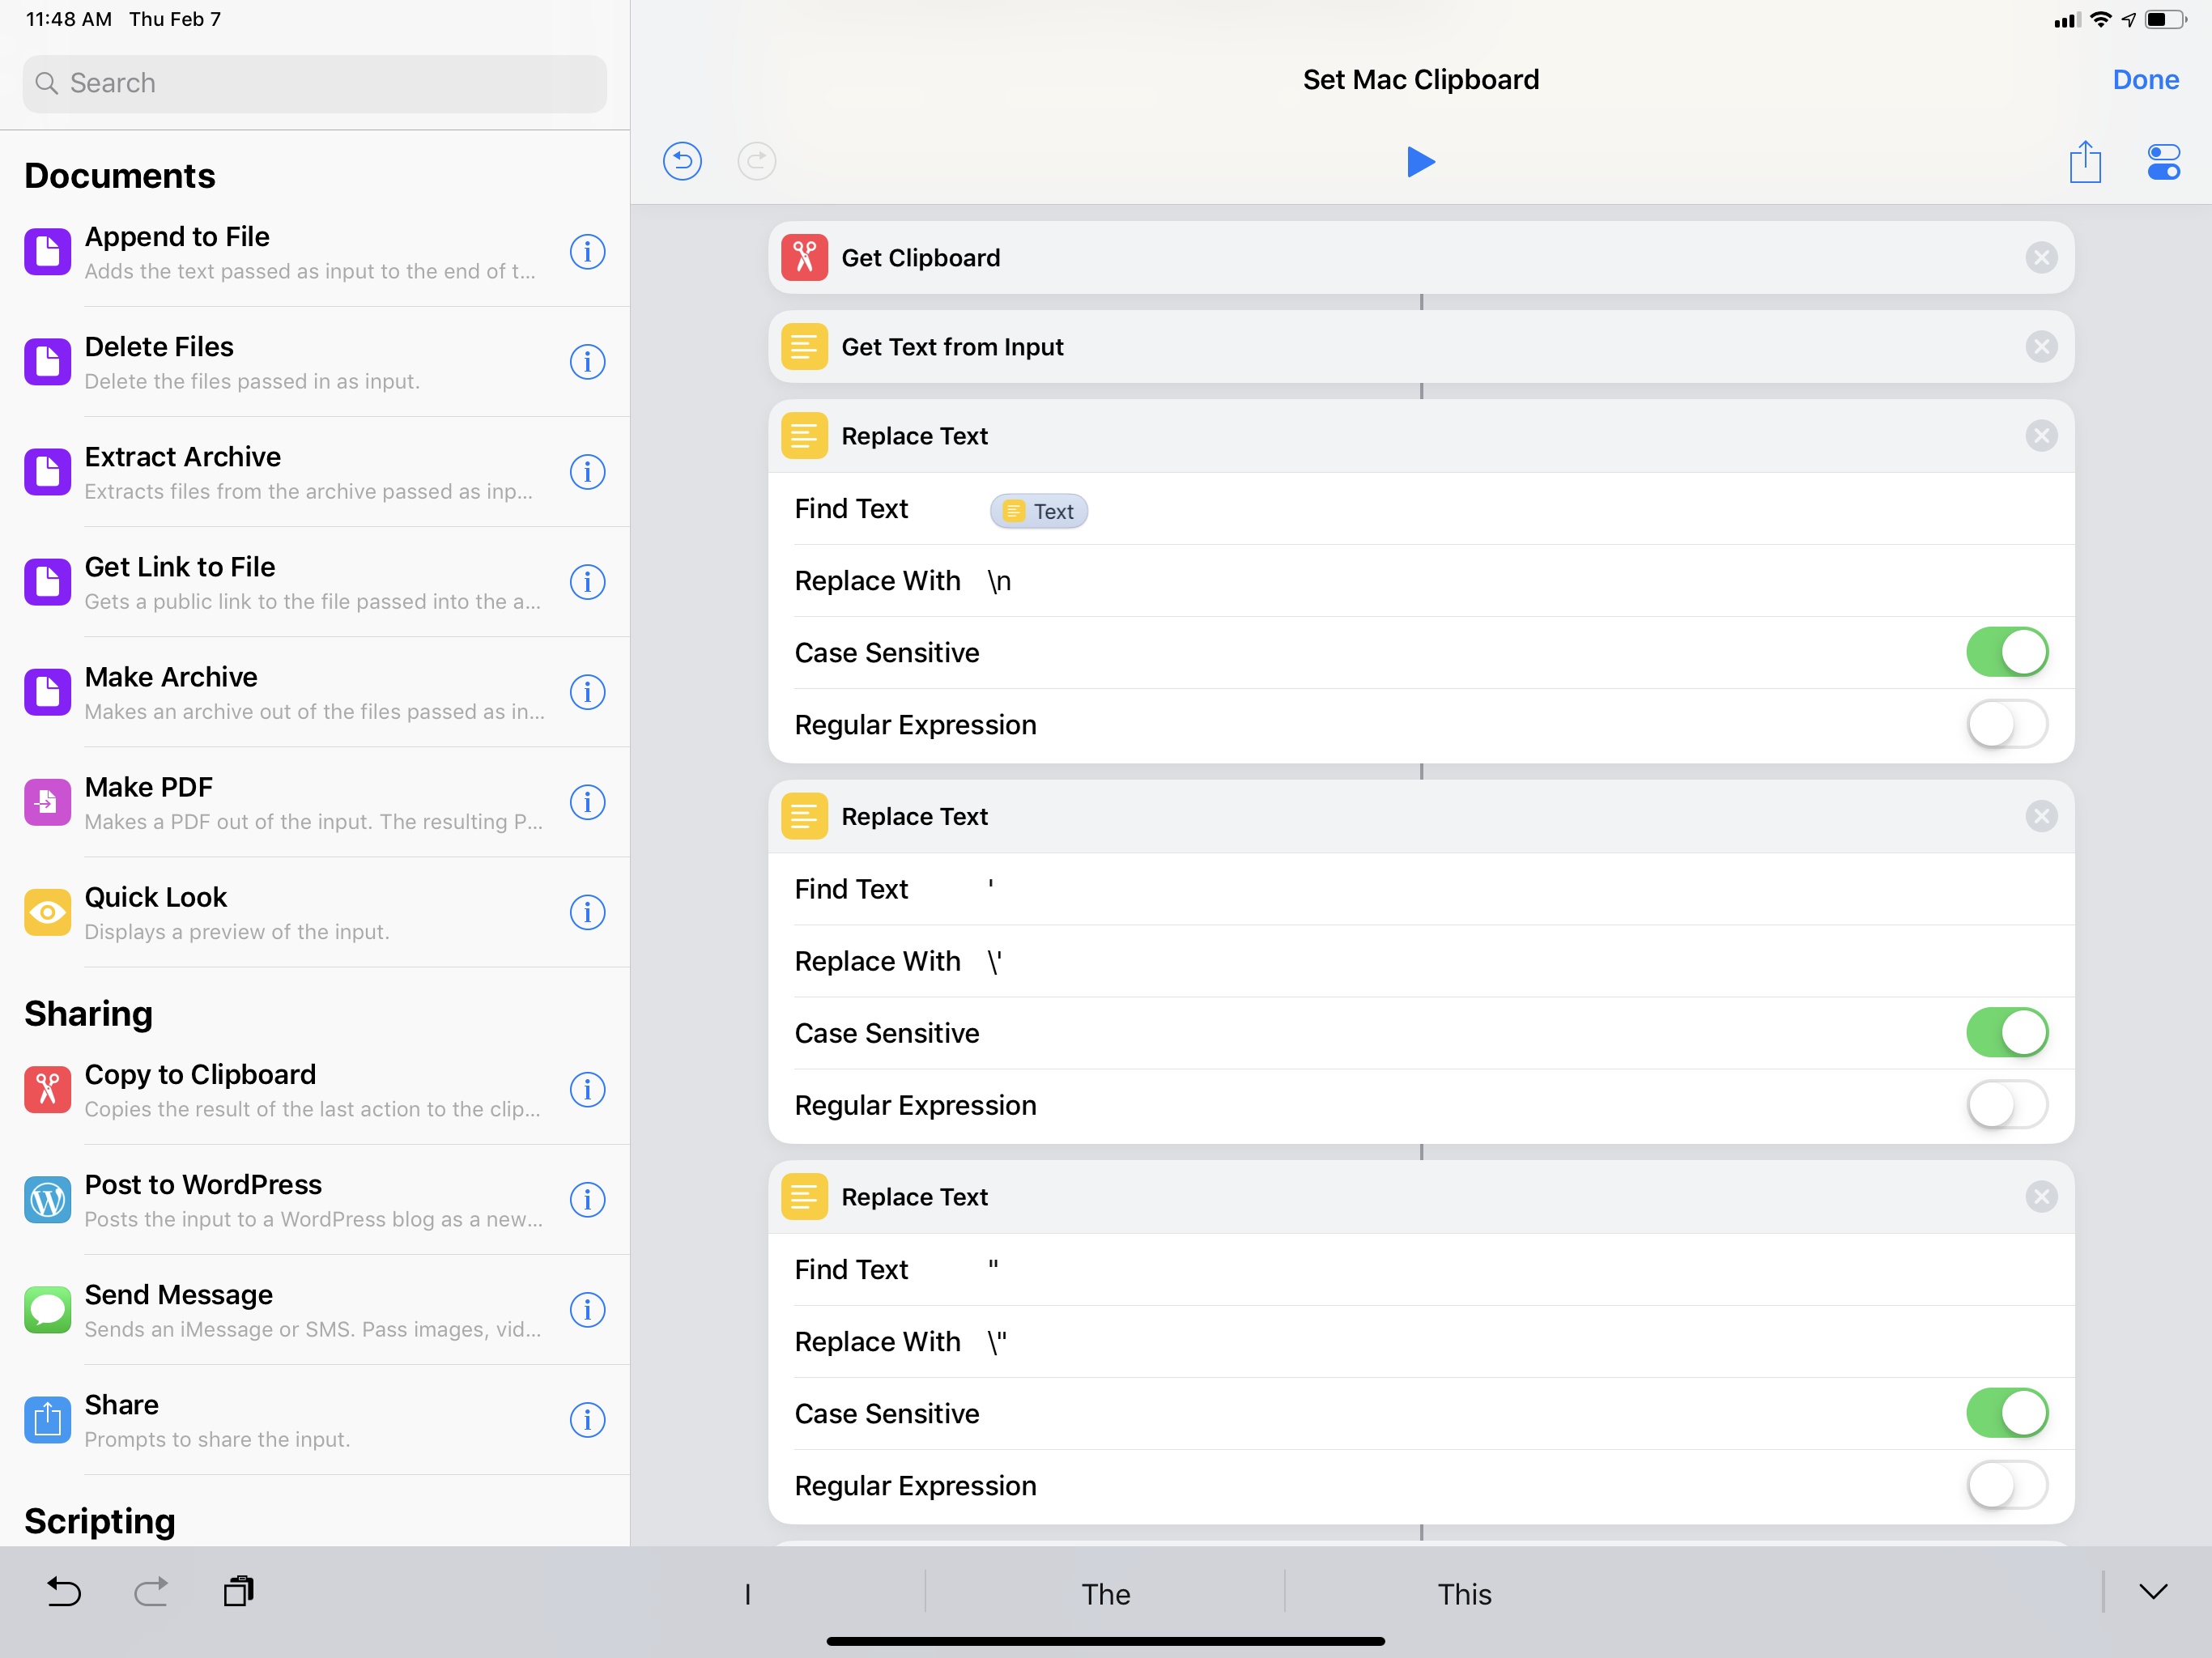 Cleaning up the iOS clipboard before sending it to a Mac.